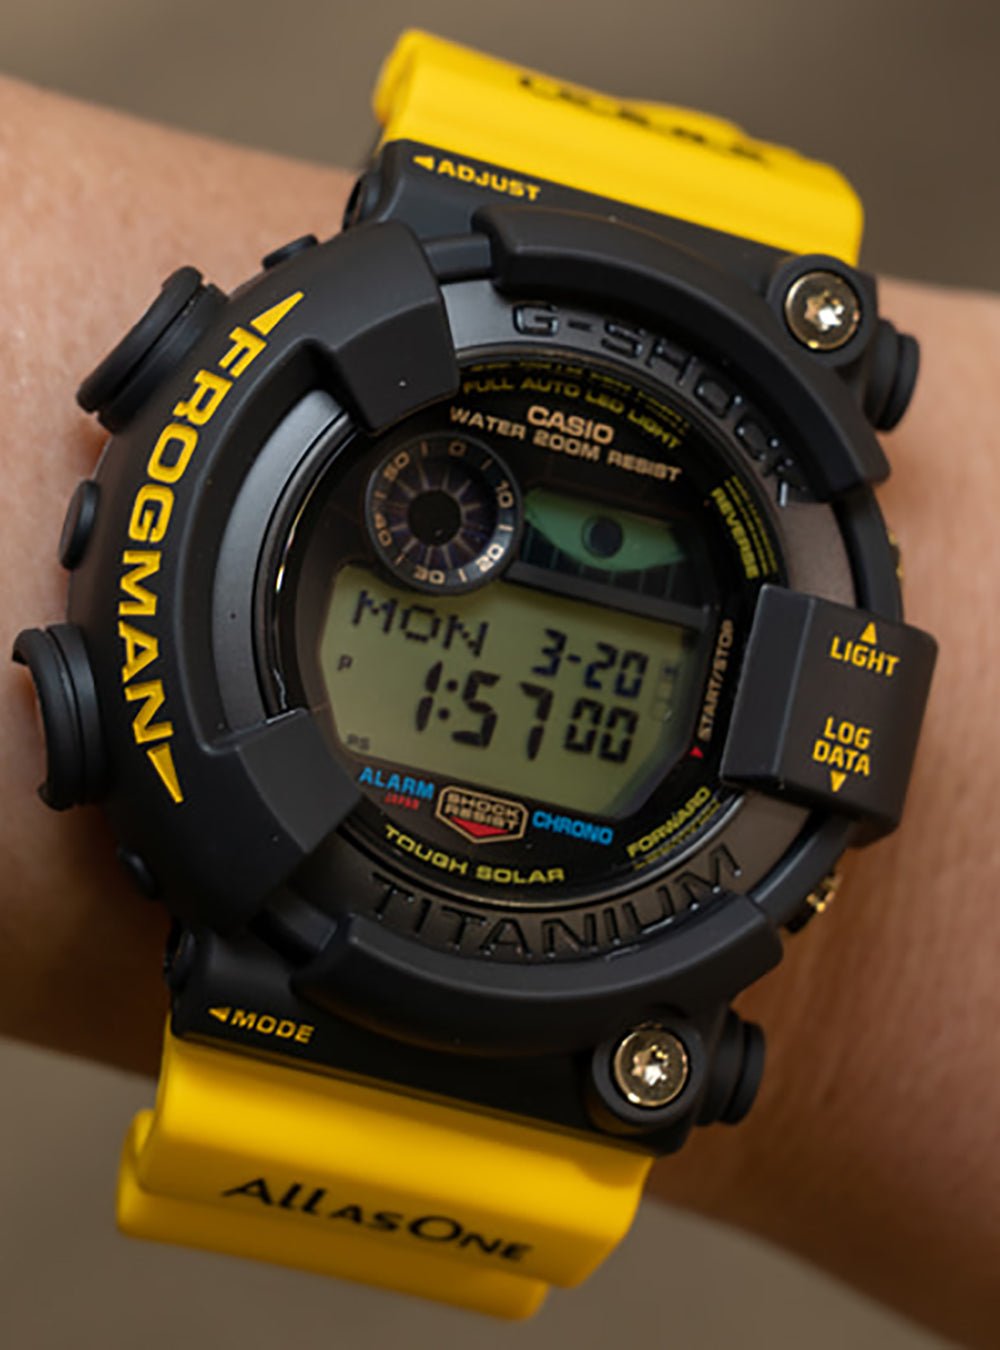 CASIO G-SHOCK WATCH I.C.E.R.C. COLLABORATION MODEL LOVE THE SEA AND THE  EARTH MASTER OF G - SEA FROGMAN GW-8200K-9JR LIMITED EDITION MADE IN JAPAN  JDM